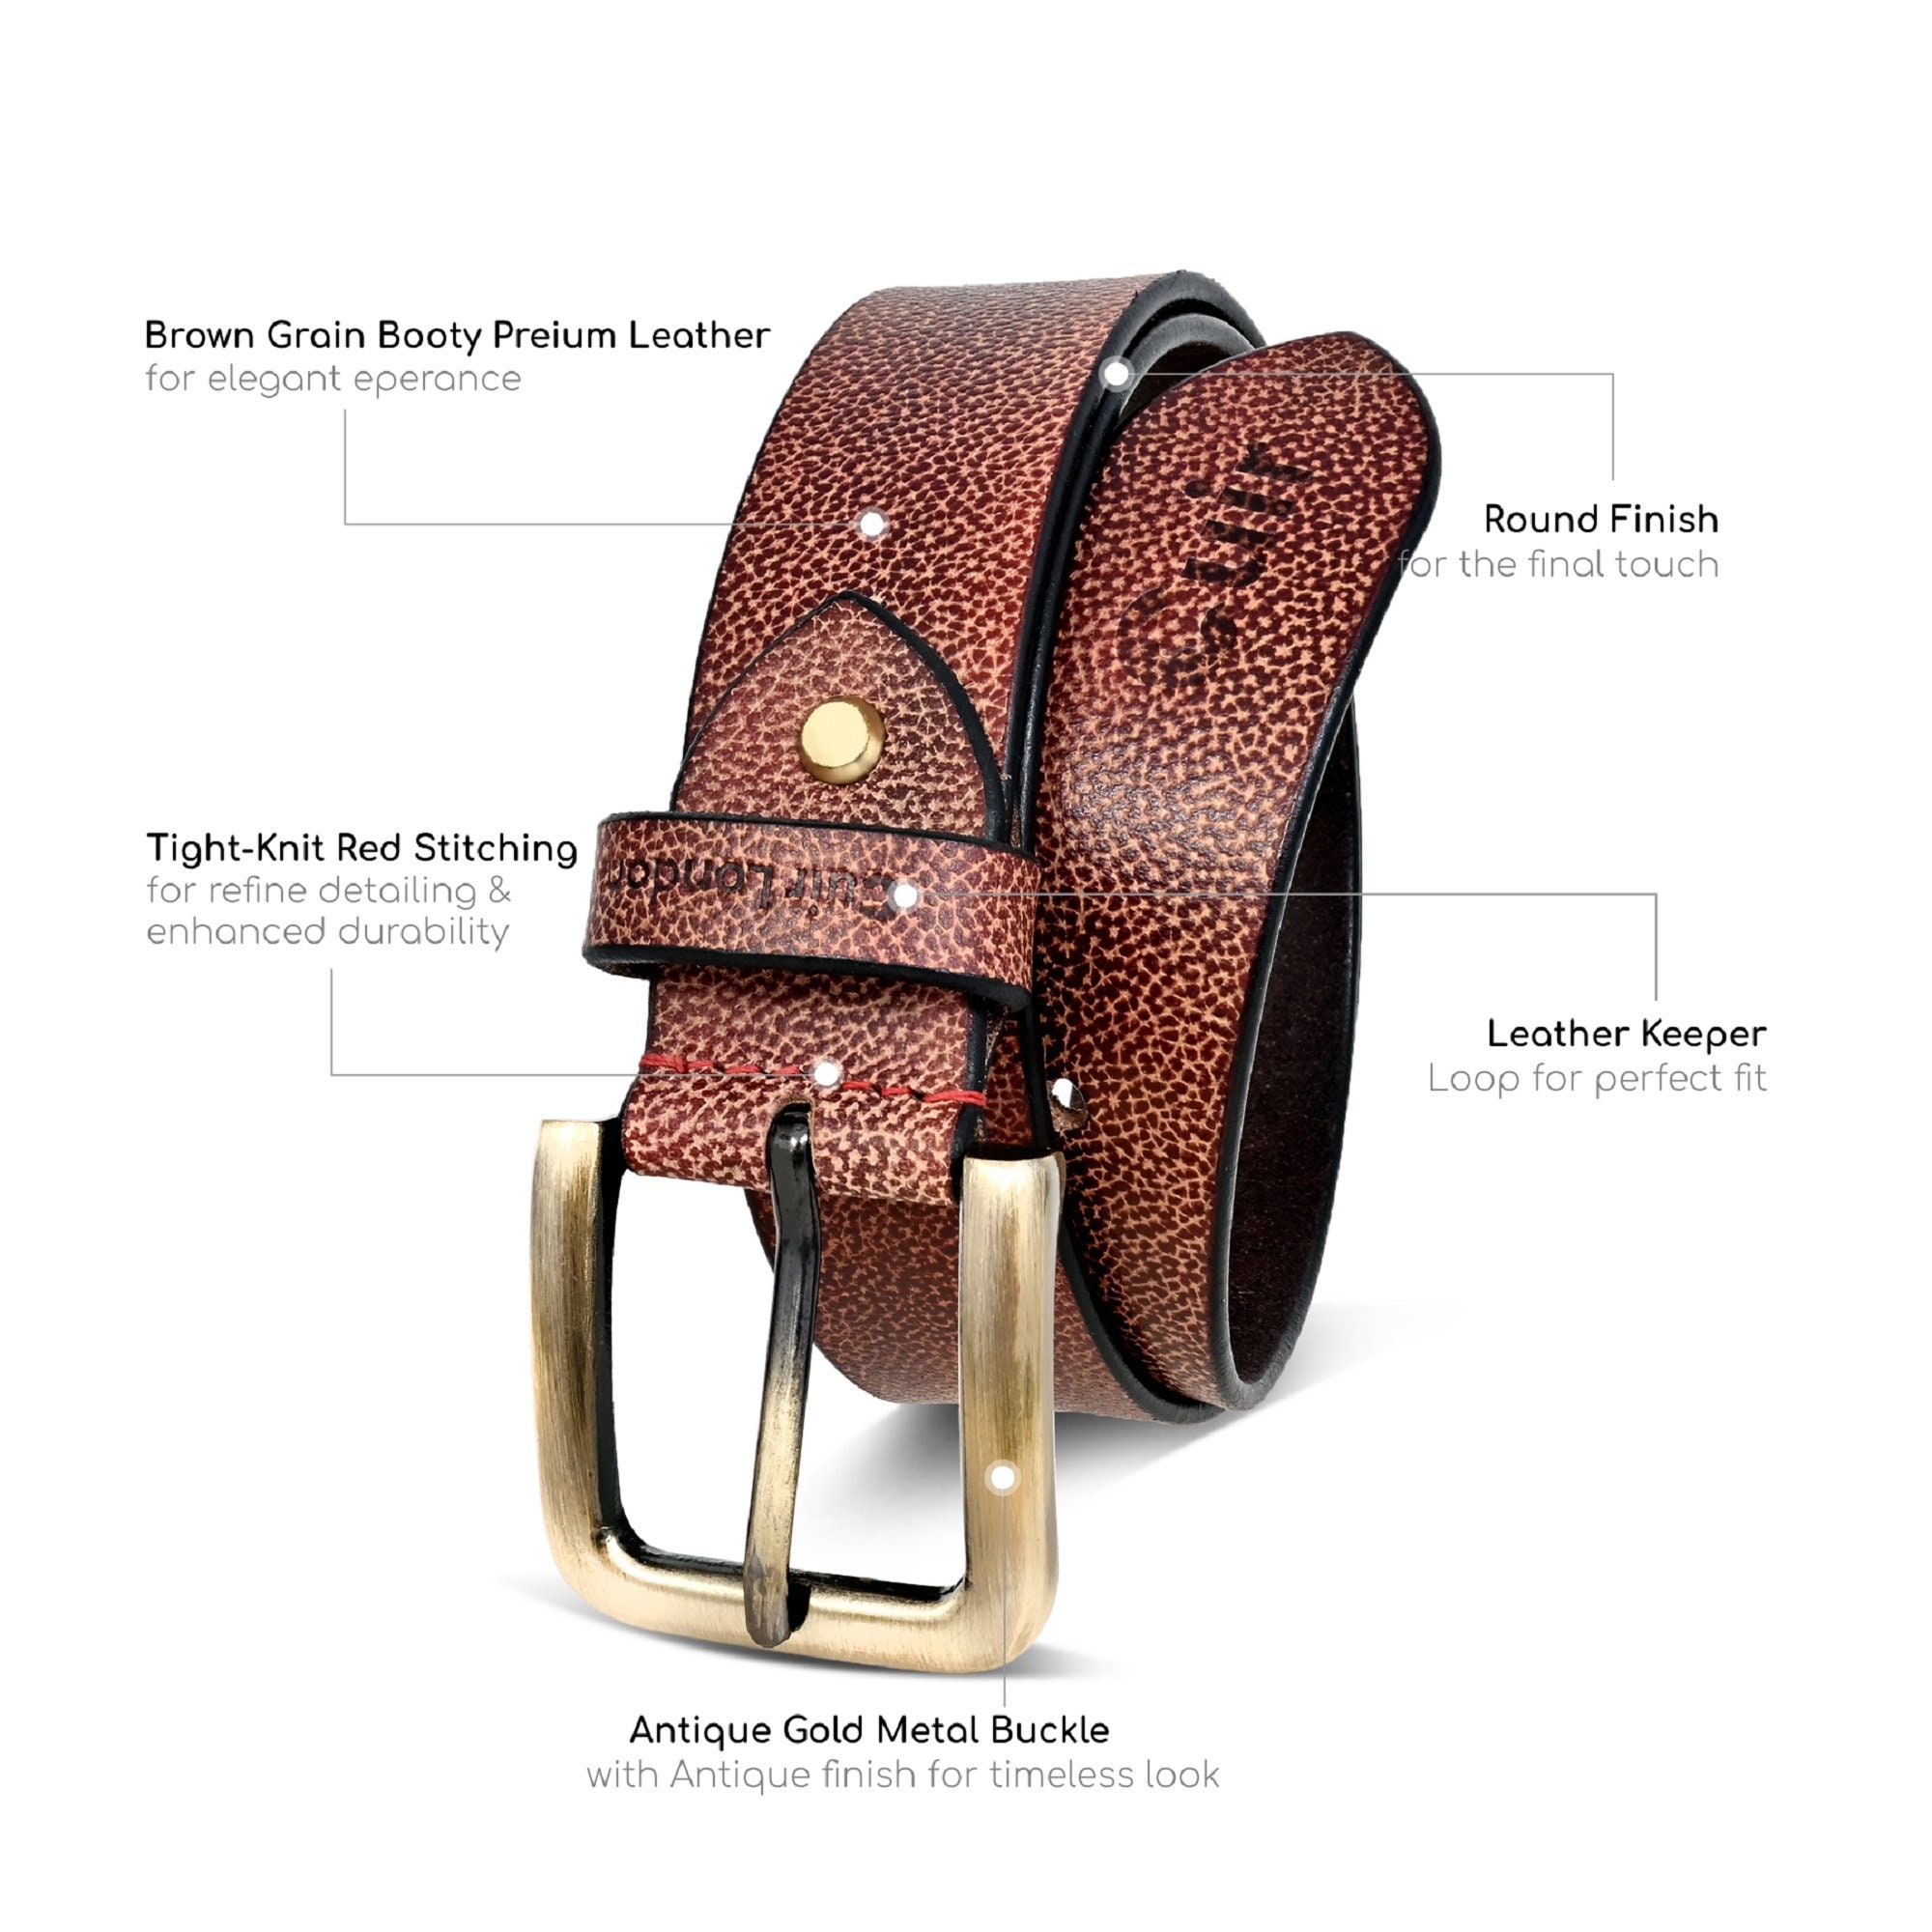 Cuir London Real Leather Belt with Copper Buckle for Husband Boyfriend, Western Cowboy Belt, Gift Ideas for Him